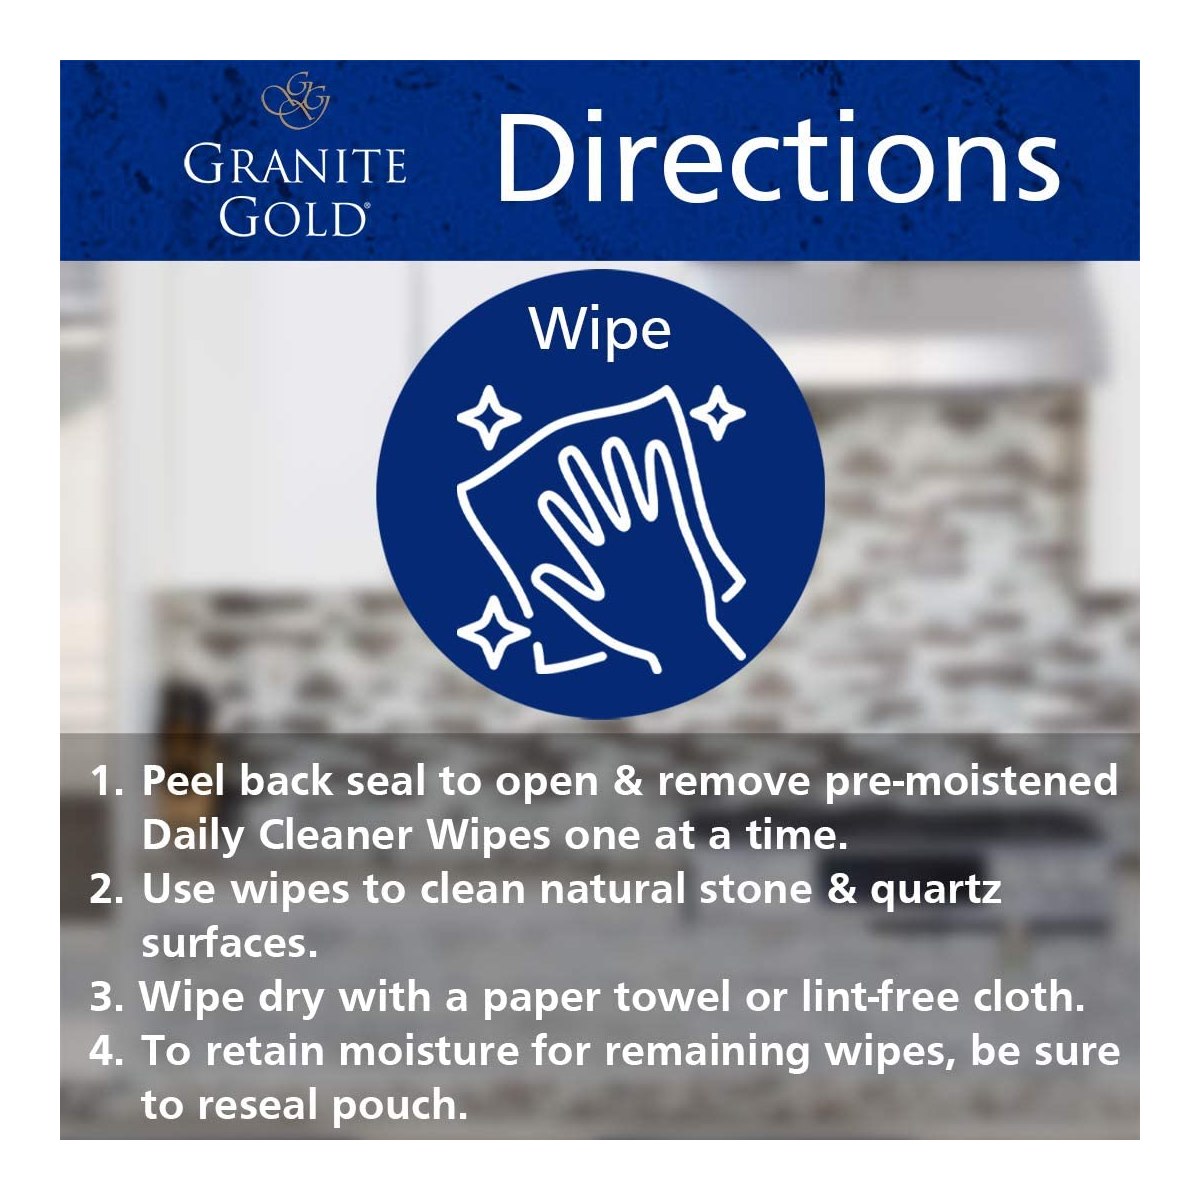 How to Use Granite Gold Daily Cleaning Wipes